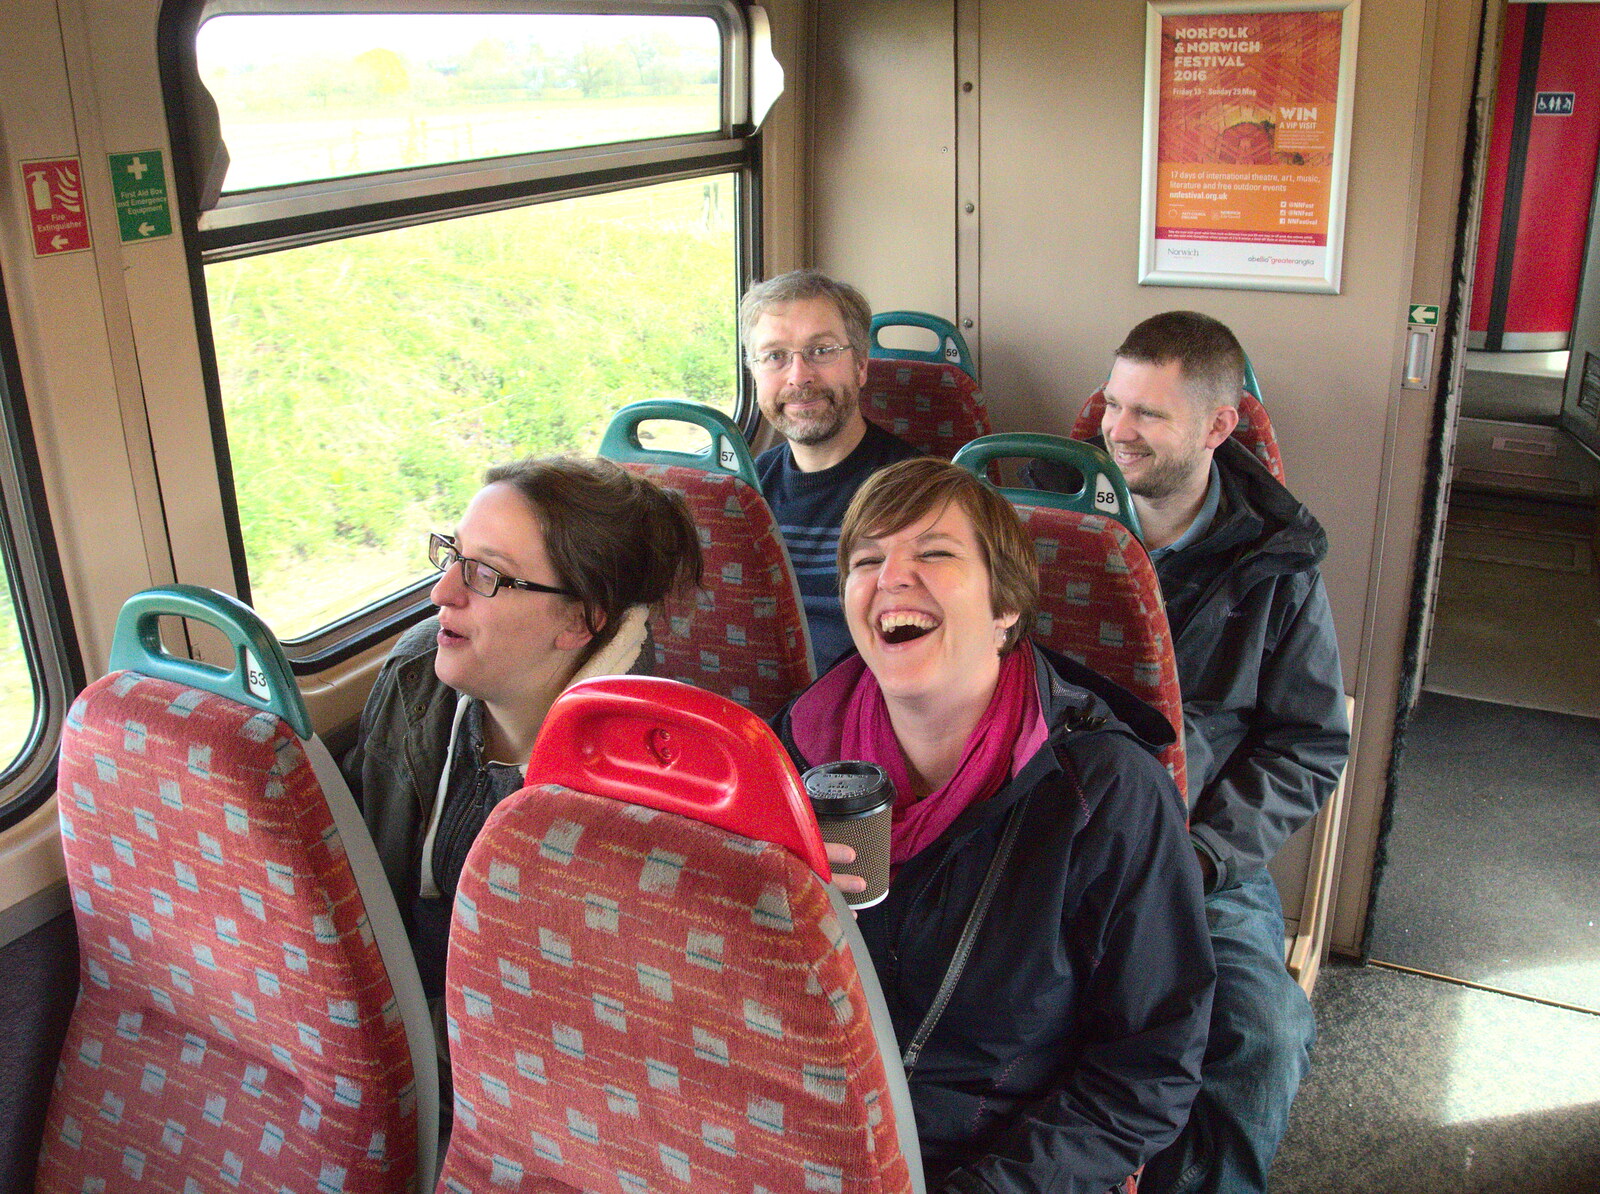 The gang on the train from Stowmarket to Bury from The East Anglian Beer Festival, Bury St Edmunds, Suffolk - 23rd April 2016